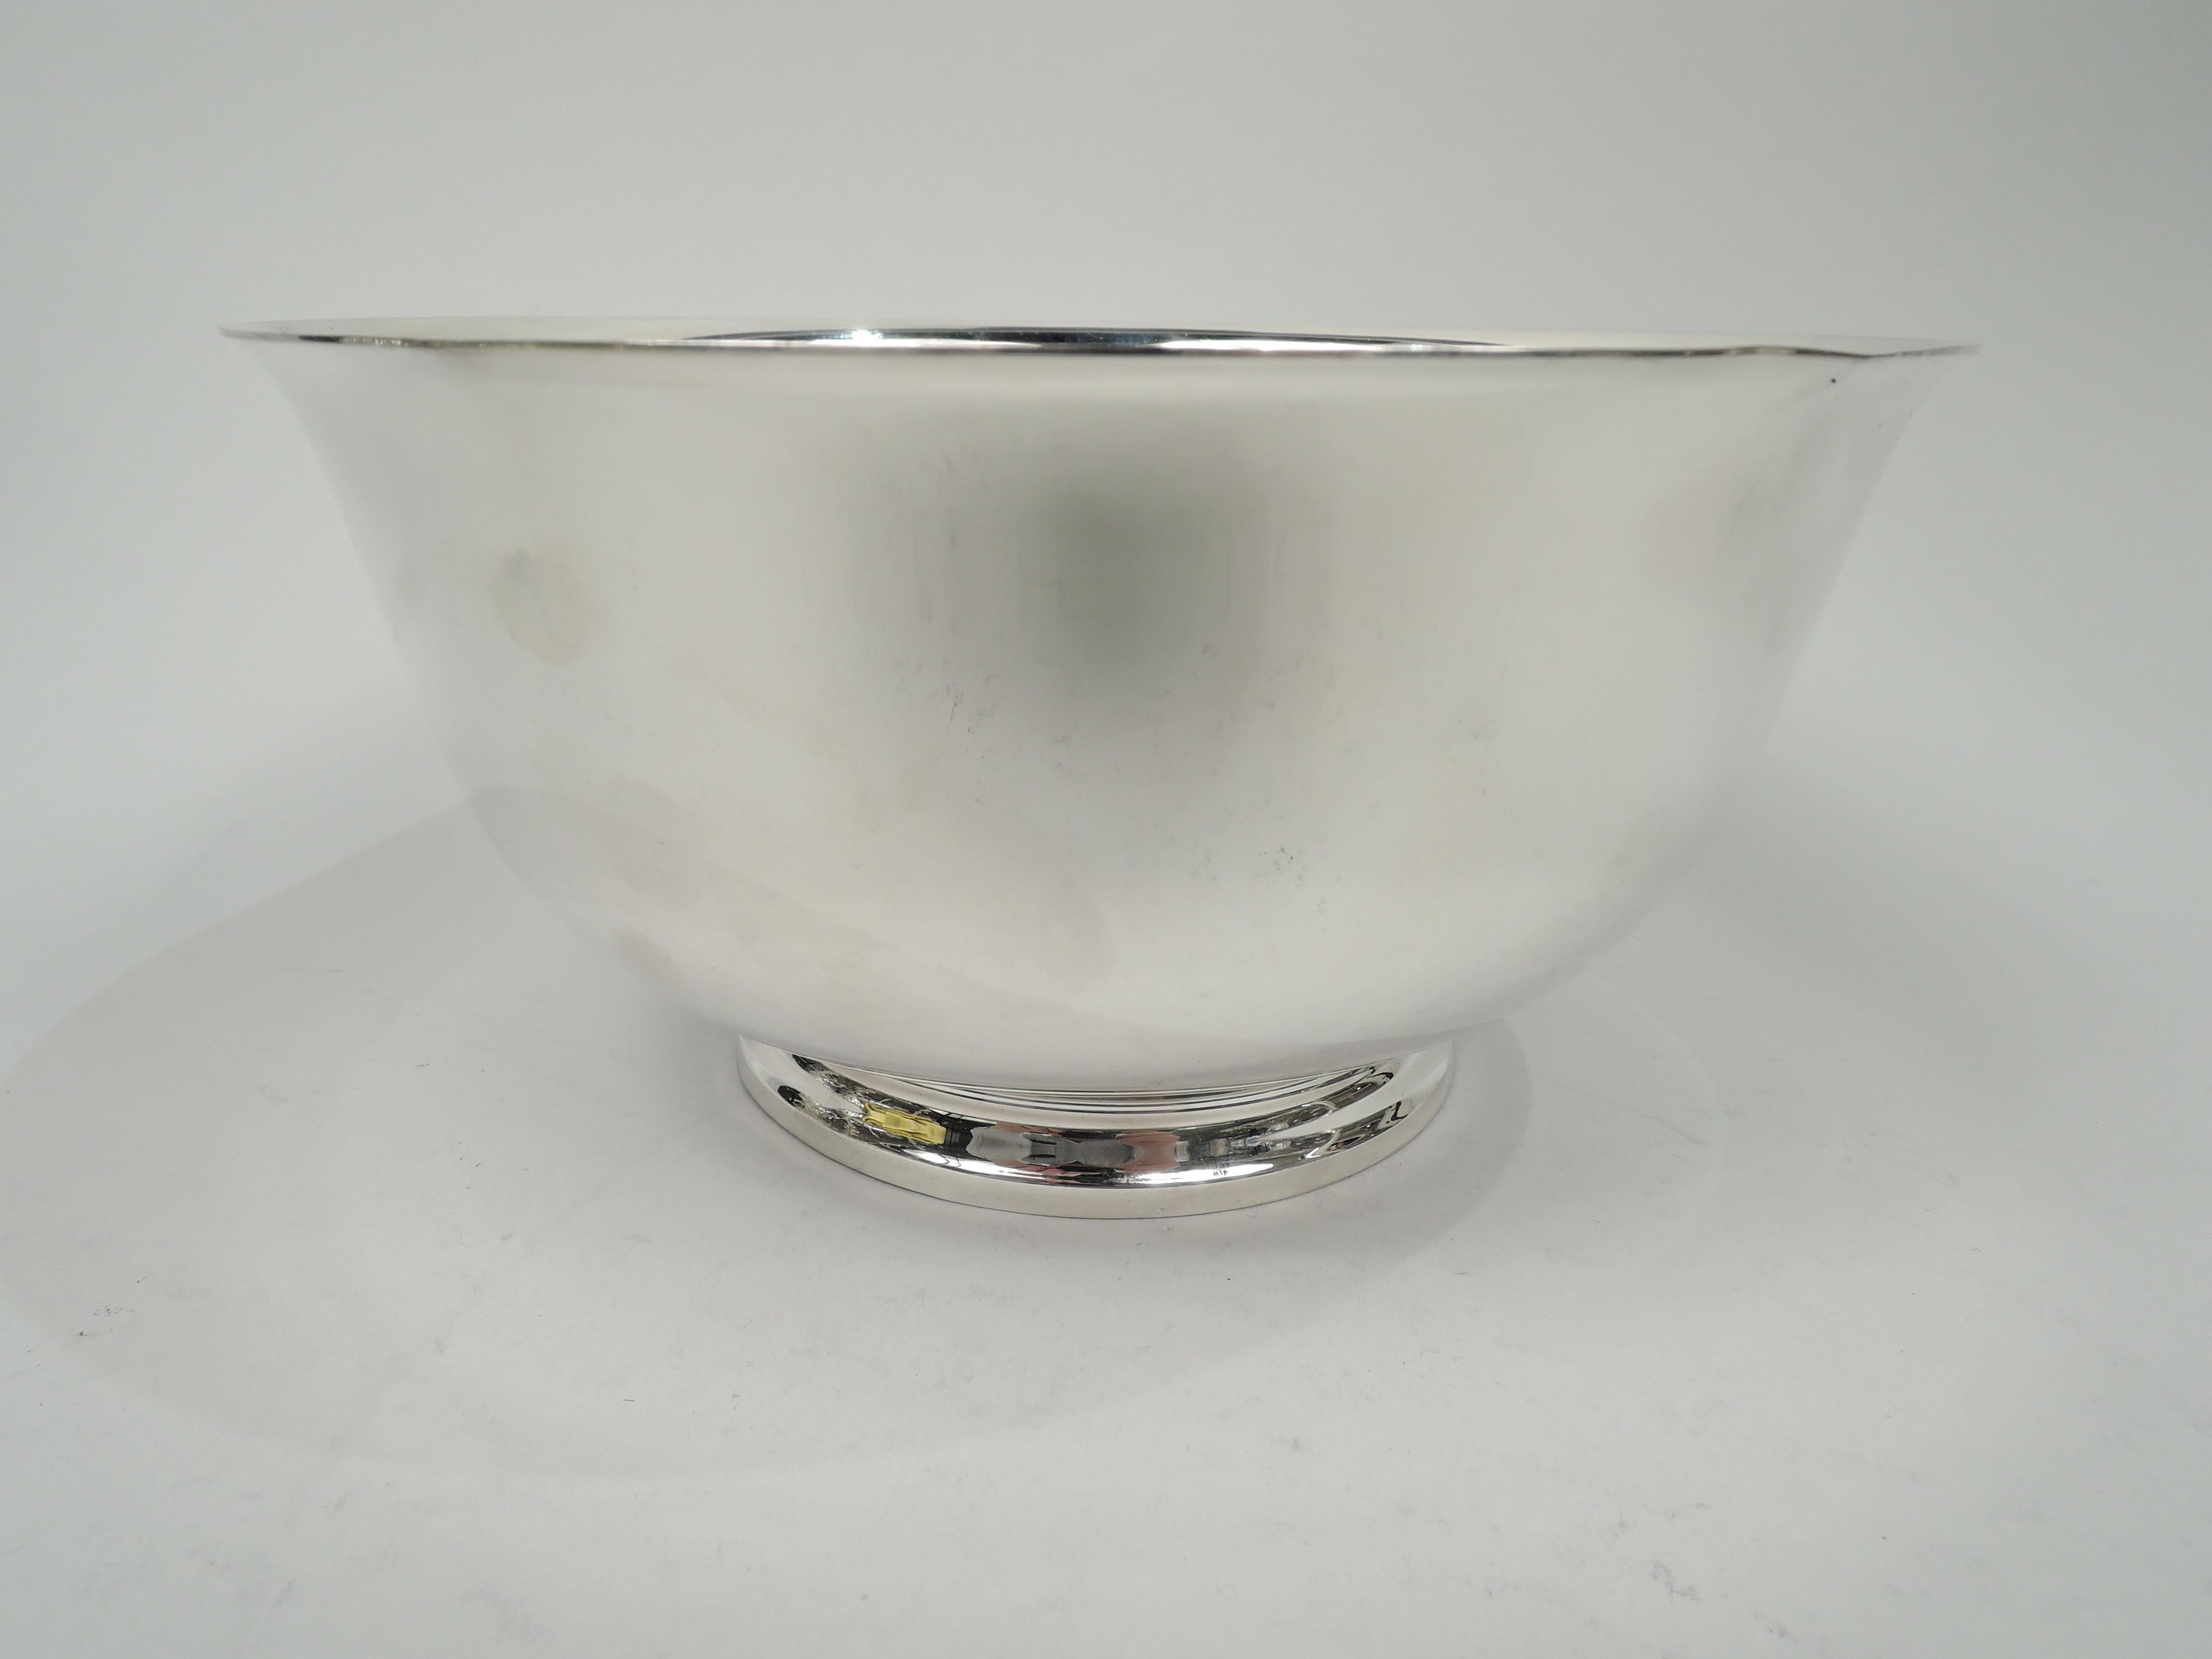 Traditional sterling silver Revere bowl. Made by Tiffany & Co. in New York. Curved and tapering sides, flared rim, and stepped foot. For serving or presentation. Lots of room for engraving. Fully marked including maker’s stamp and postwar pattern